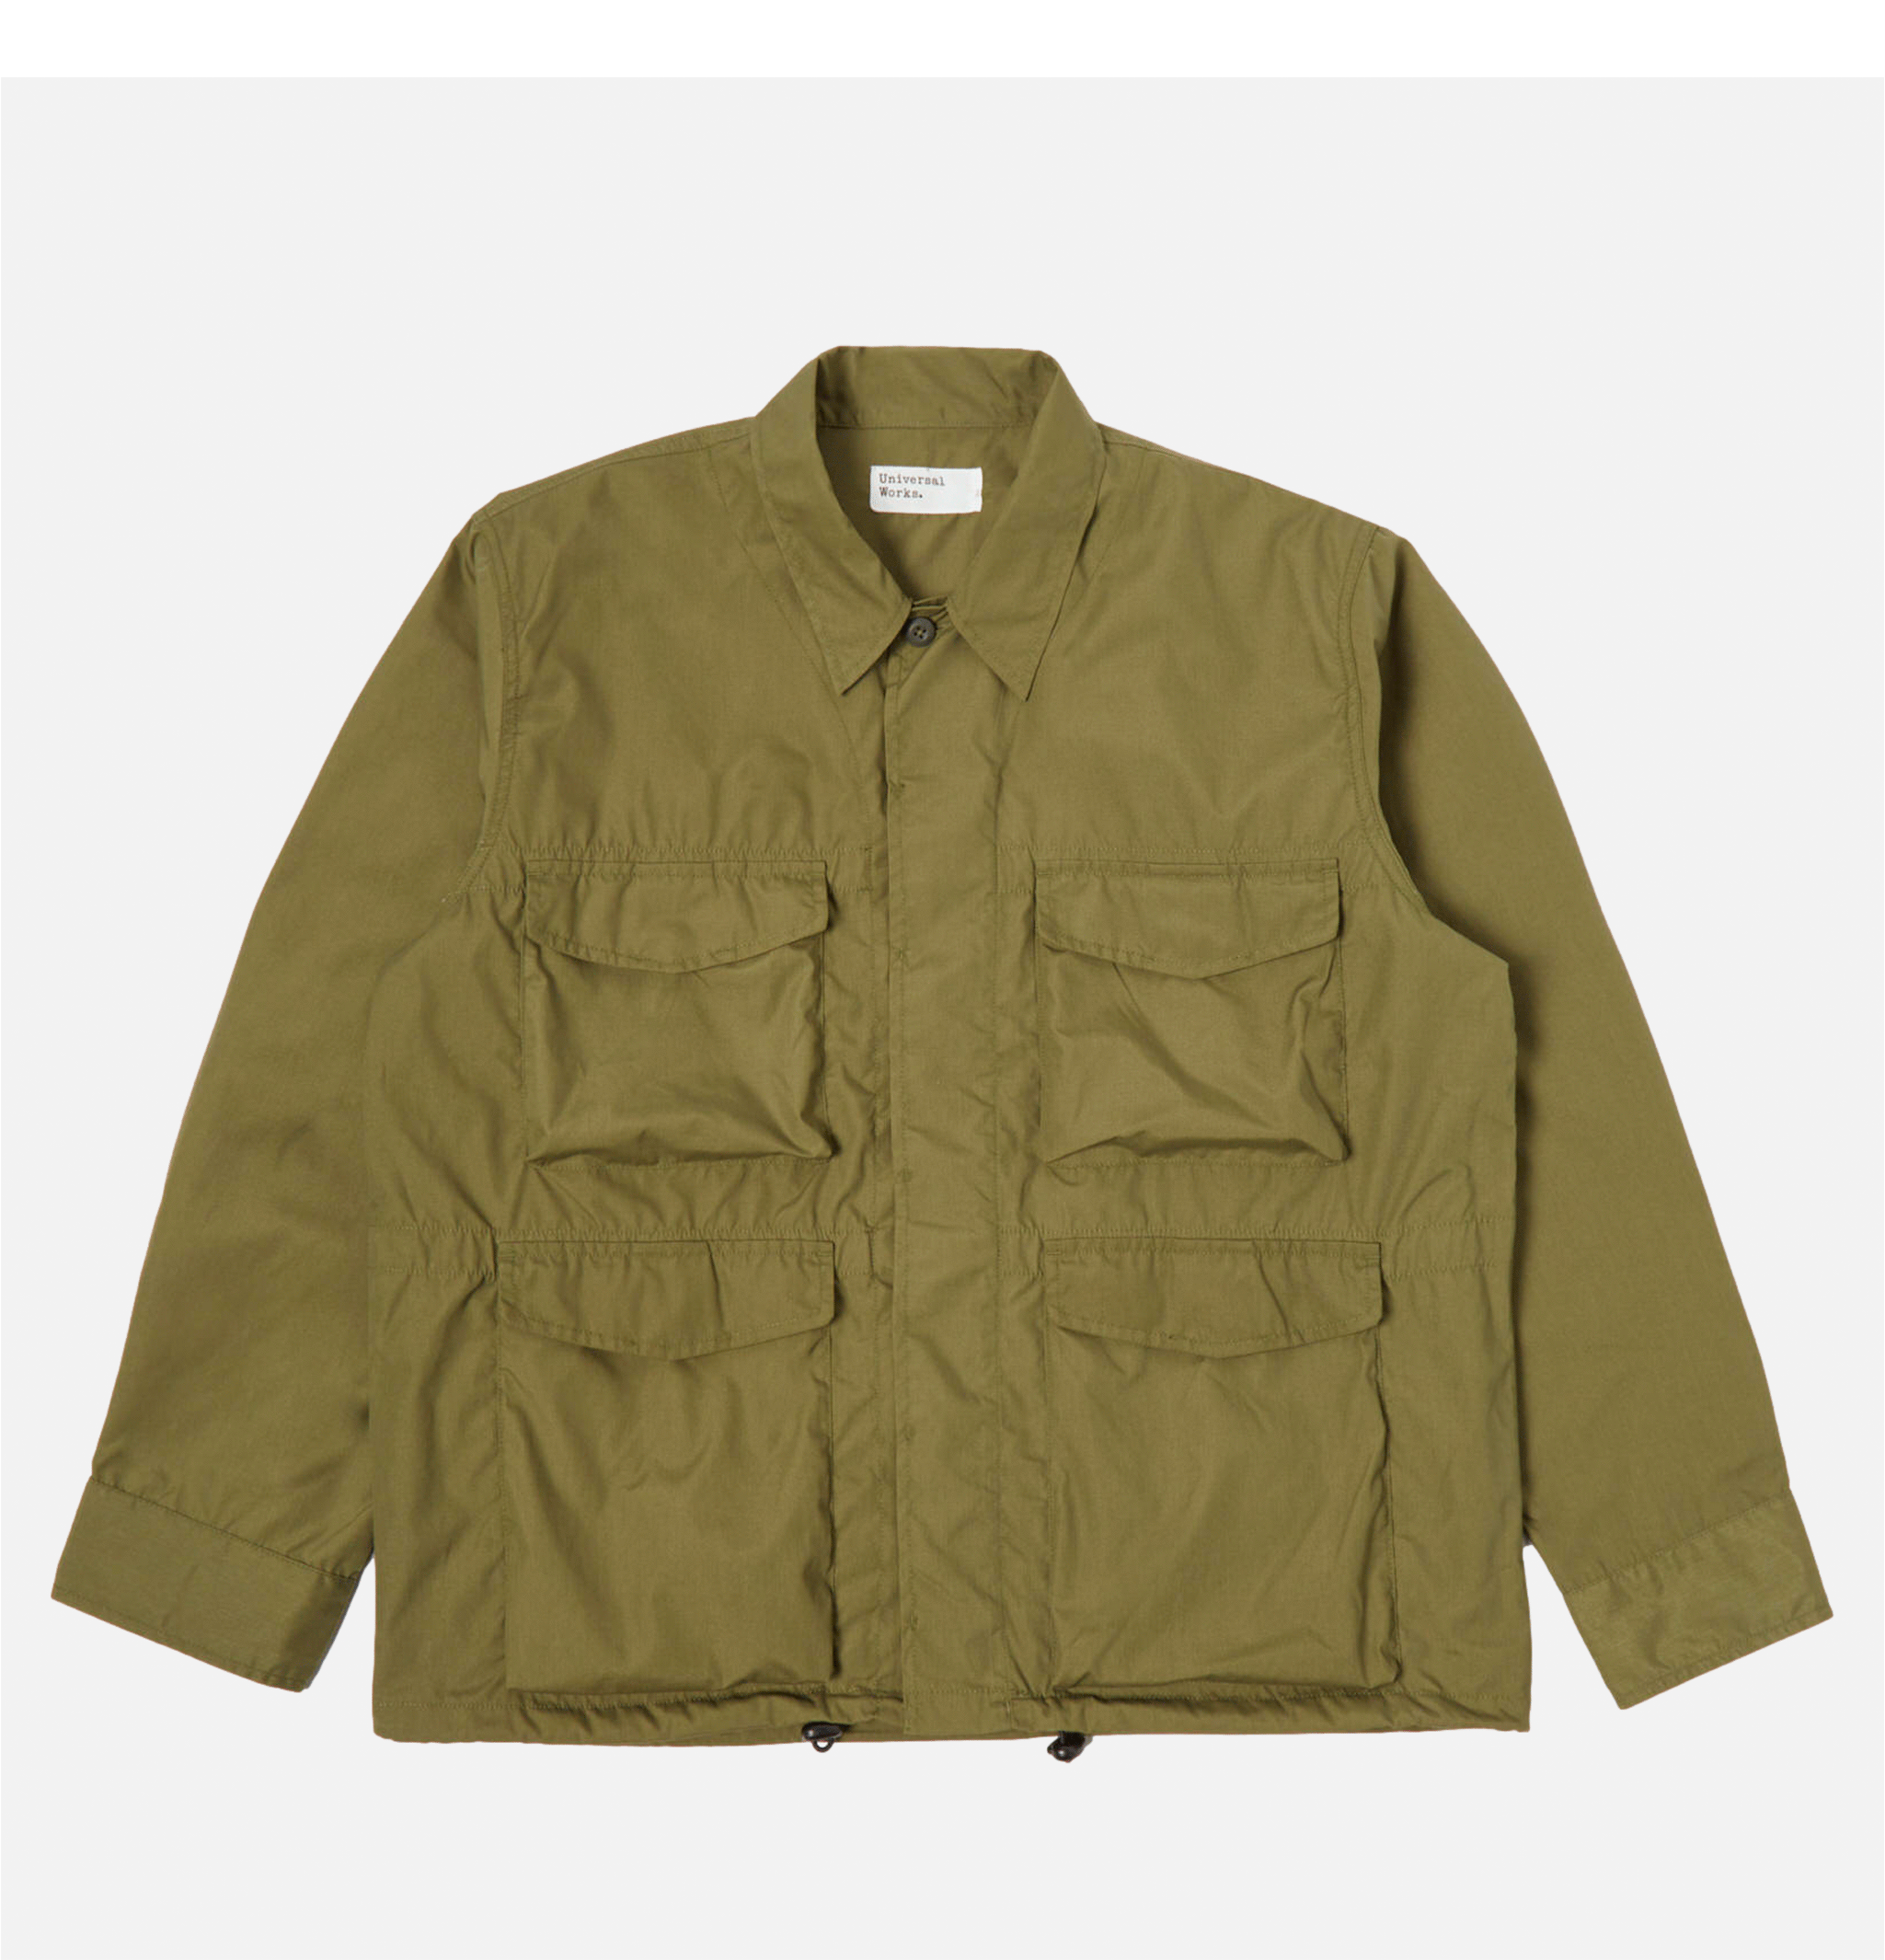 Universal Works recycled polytechnic olive parachute field jacket